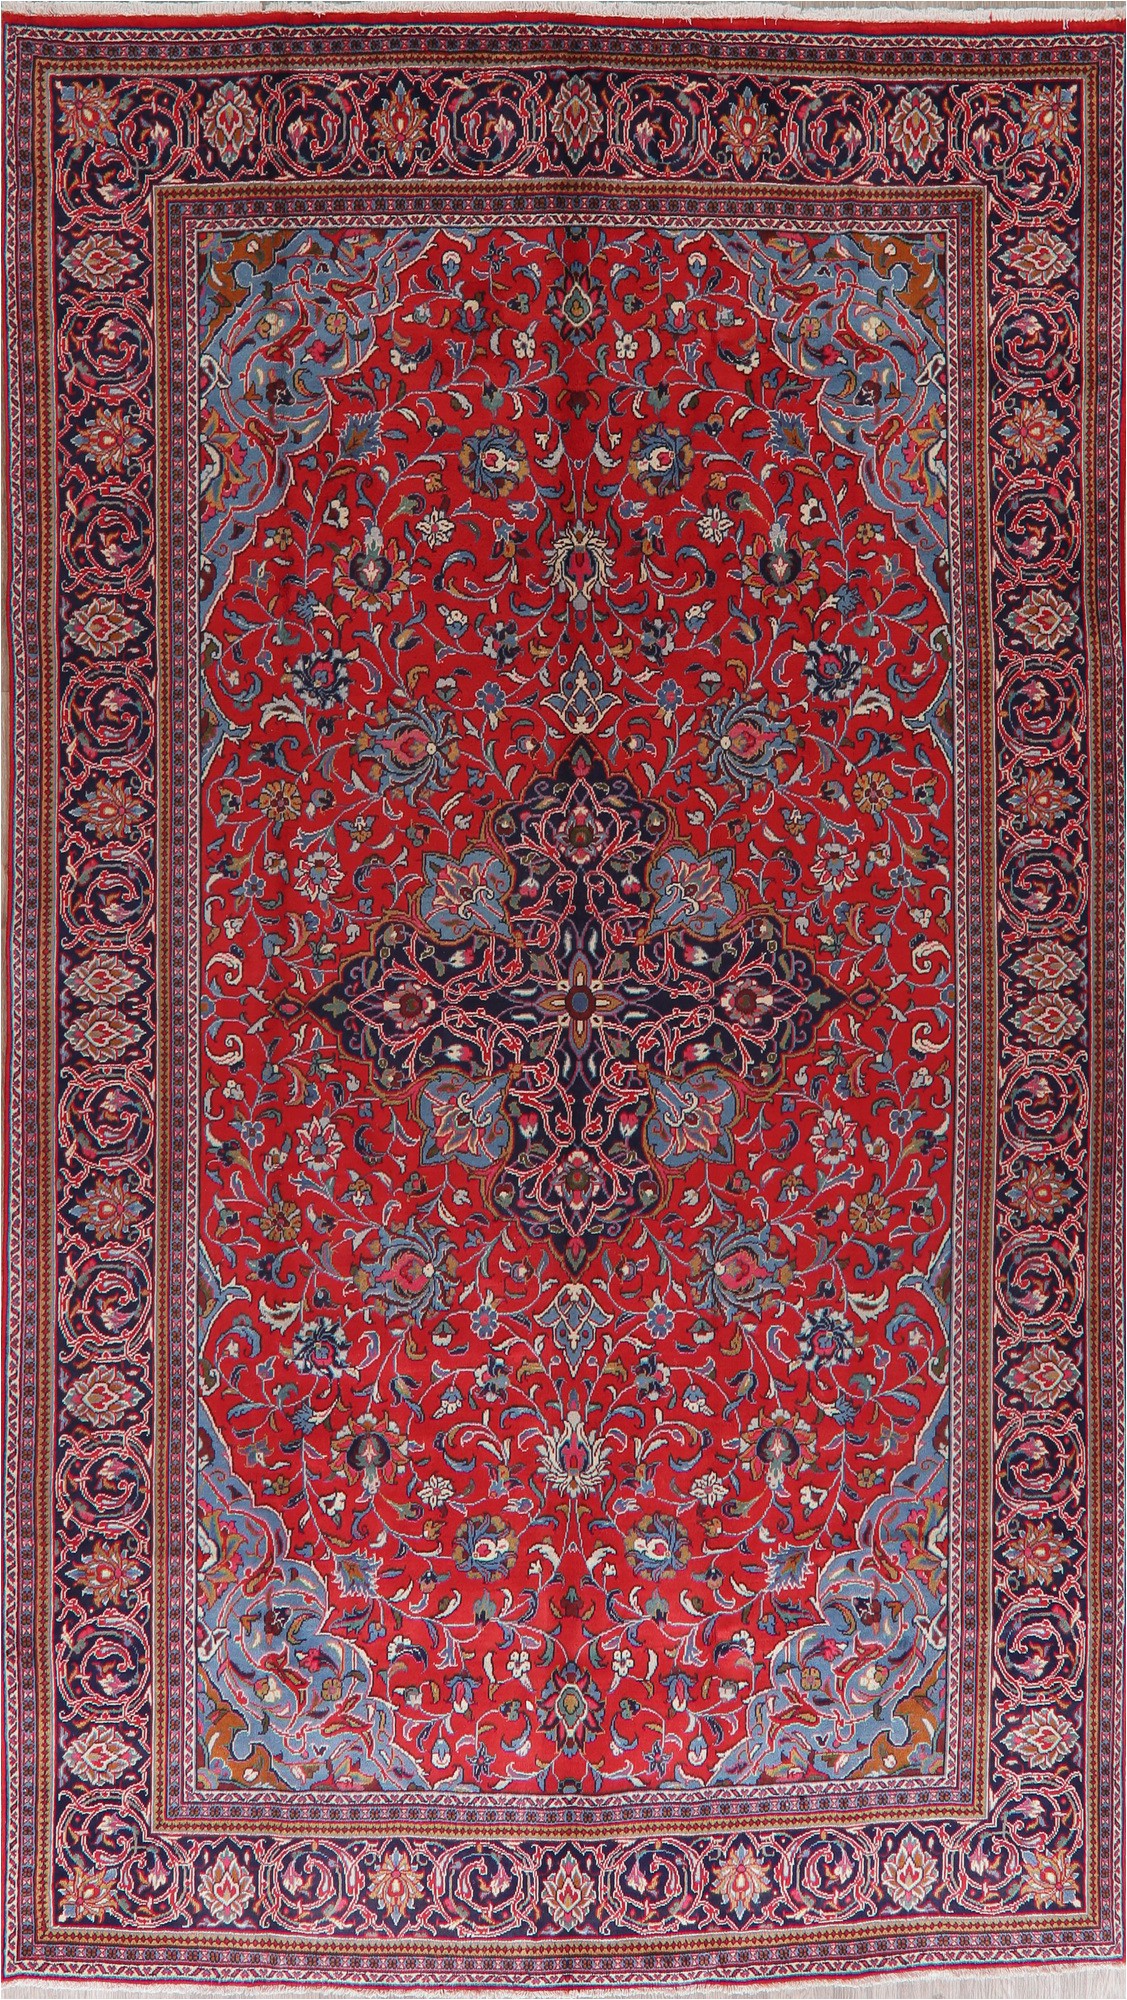 Area Rugs On Sale for Black Friday Black Friday Deal Floral Red Sarouk oriental Hand Knotted area Rug Medallion Wool Carpet 8×11 Walmart